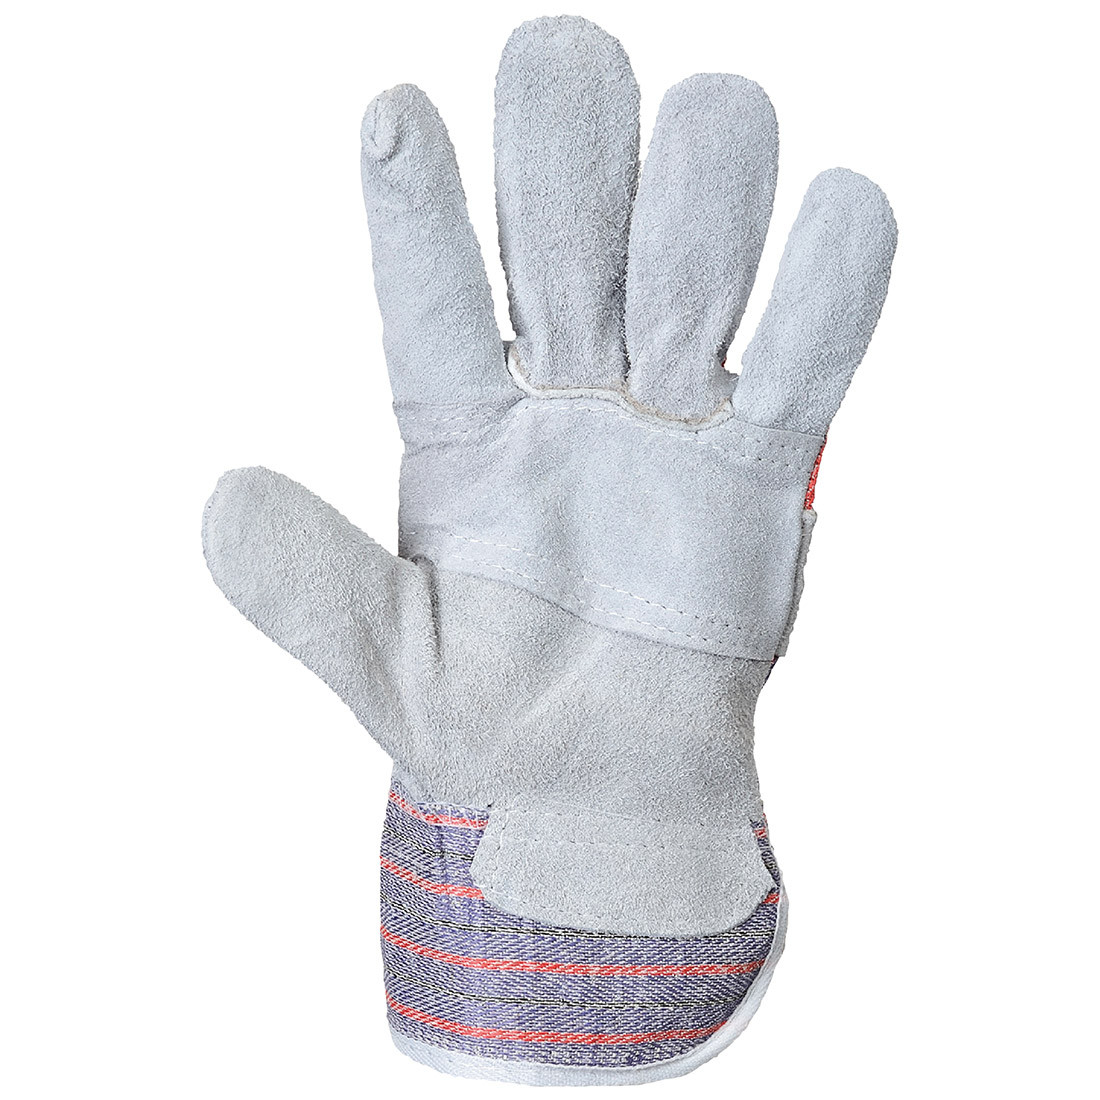 Classic Canadian Rigger Glove - Personal protection